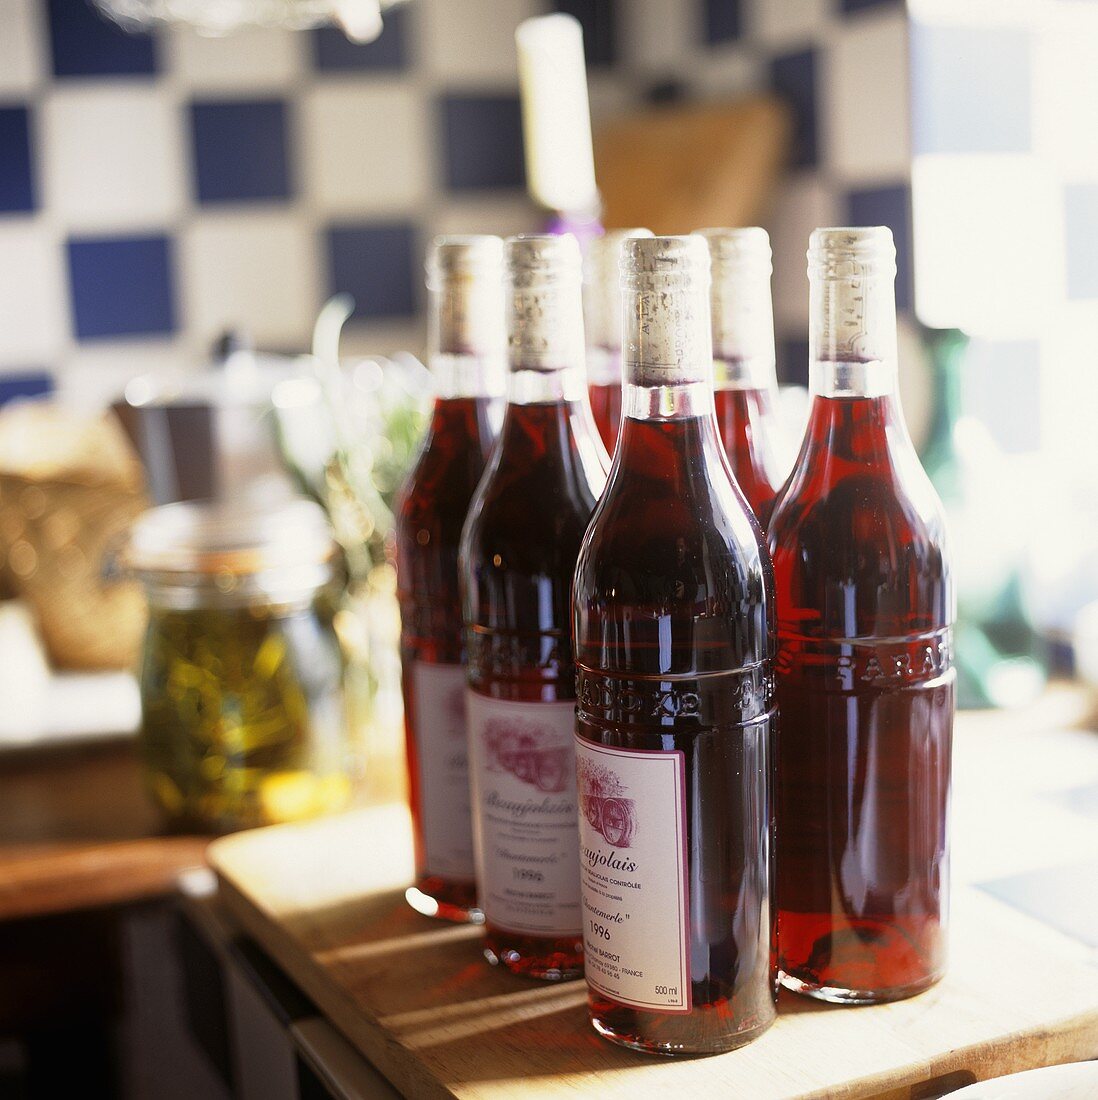 Several bottles of red wine in a kitchen